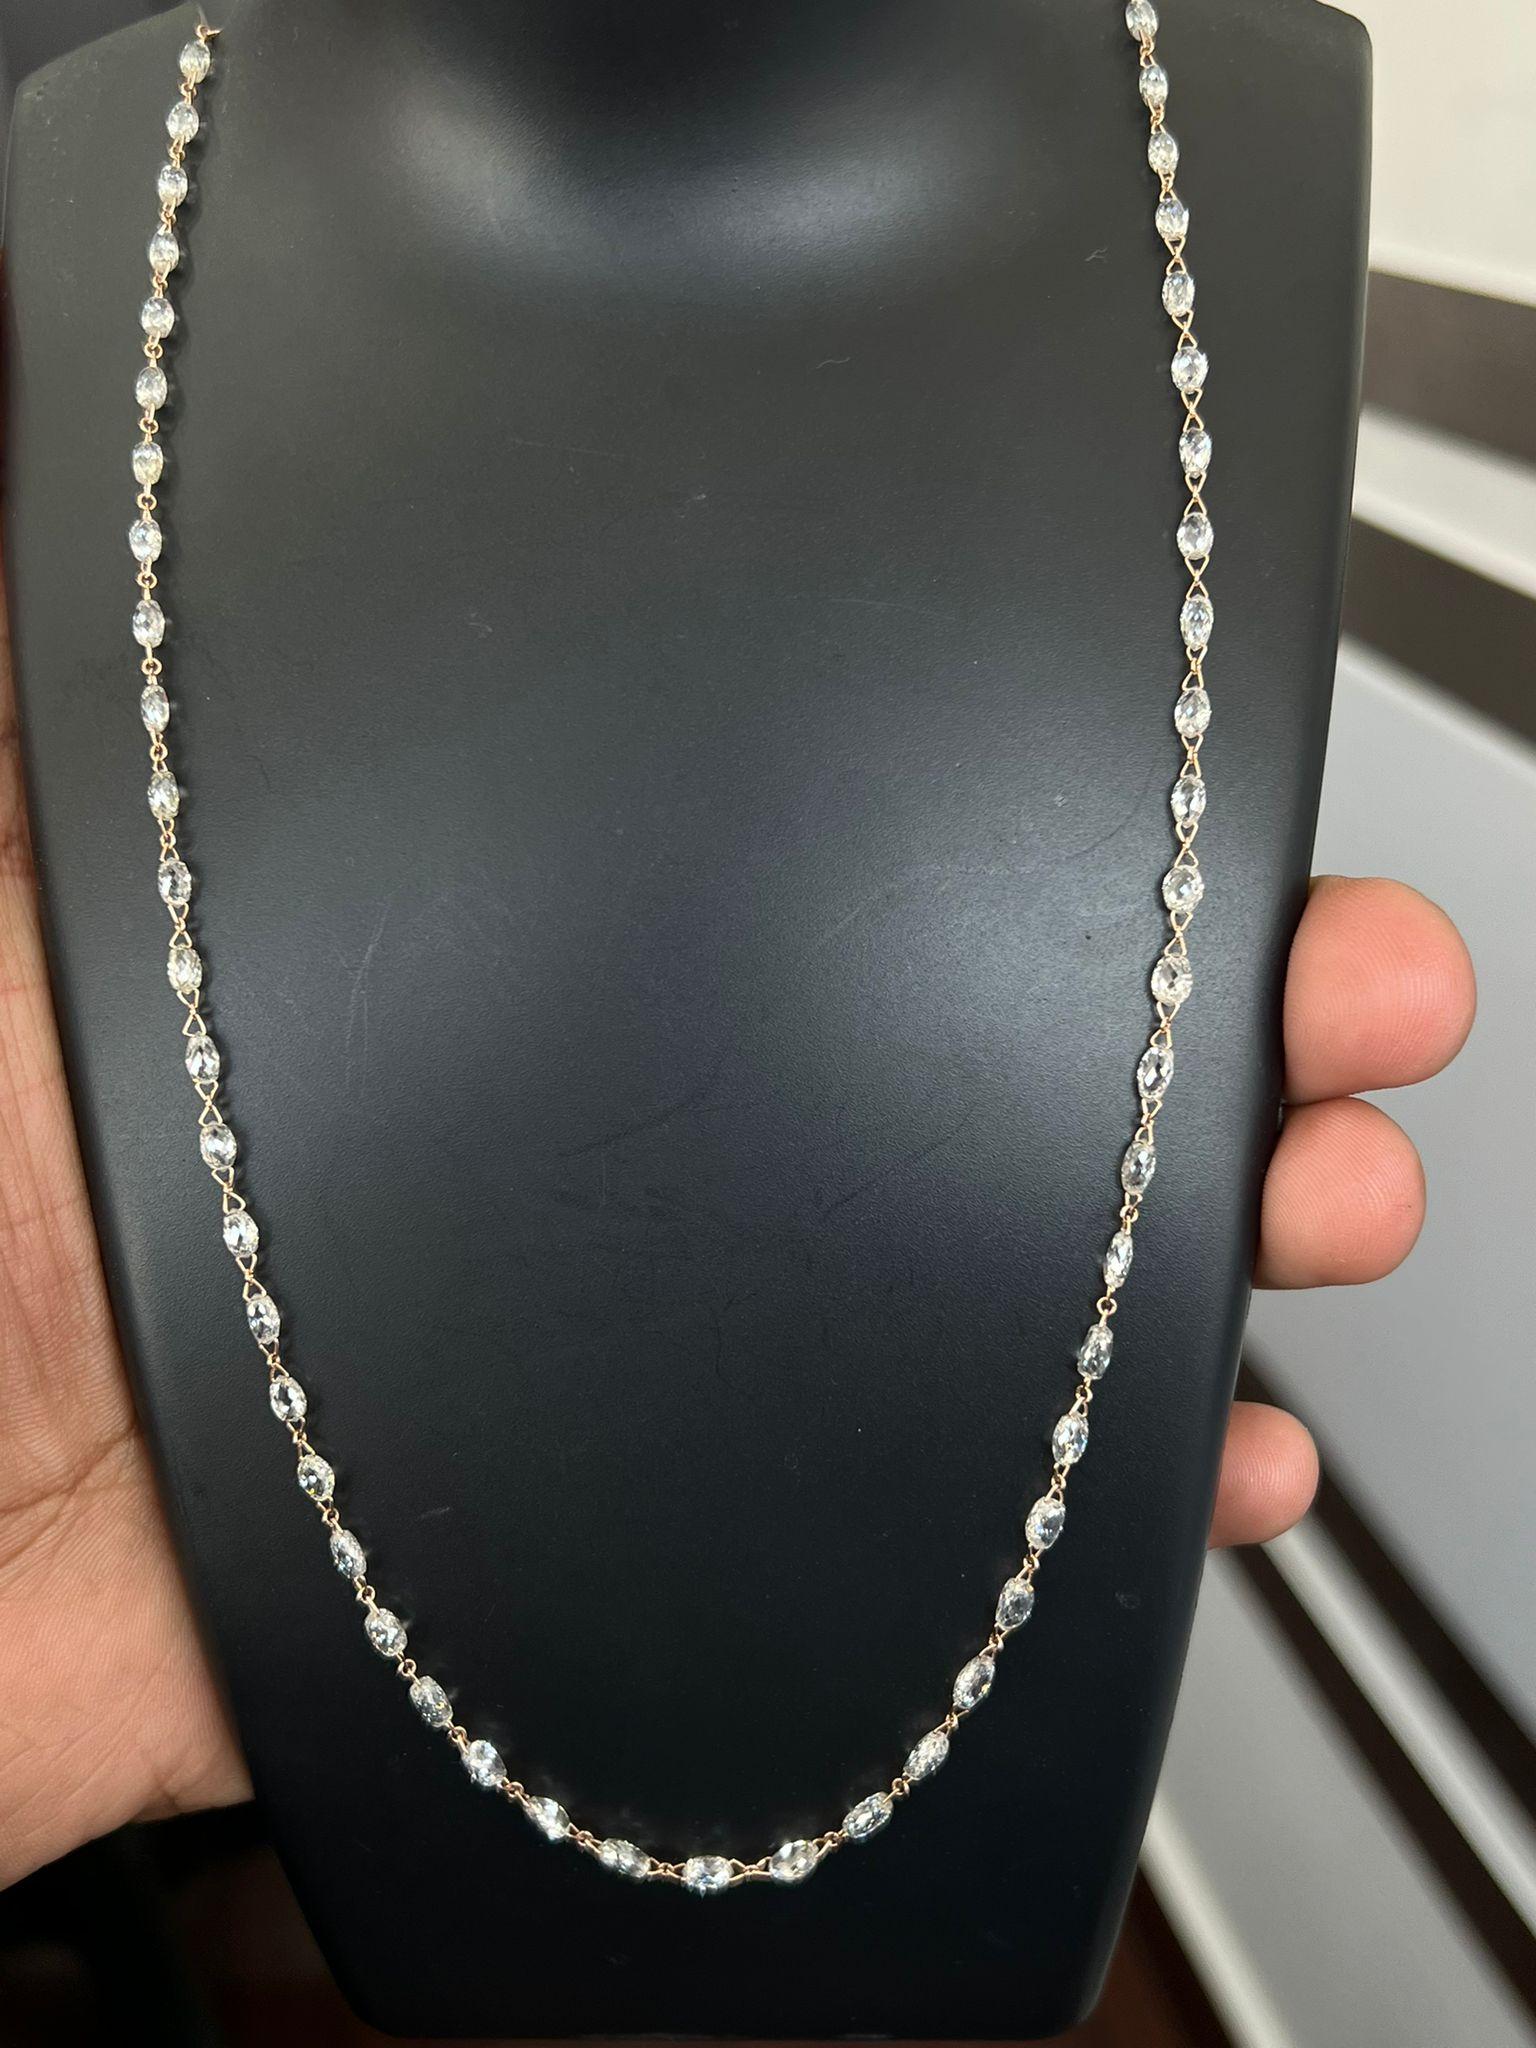 Panim 19.87 Carats Diamond Briolette Chain Necklace in 18k Yellow Gold For Sale 1